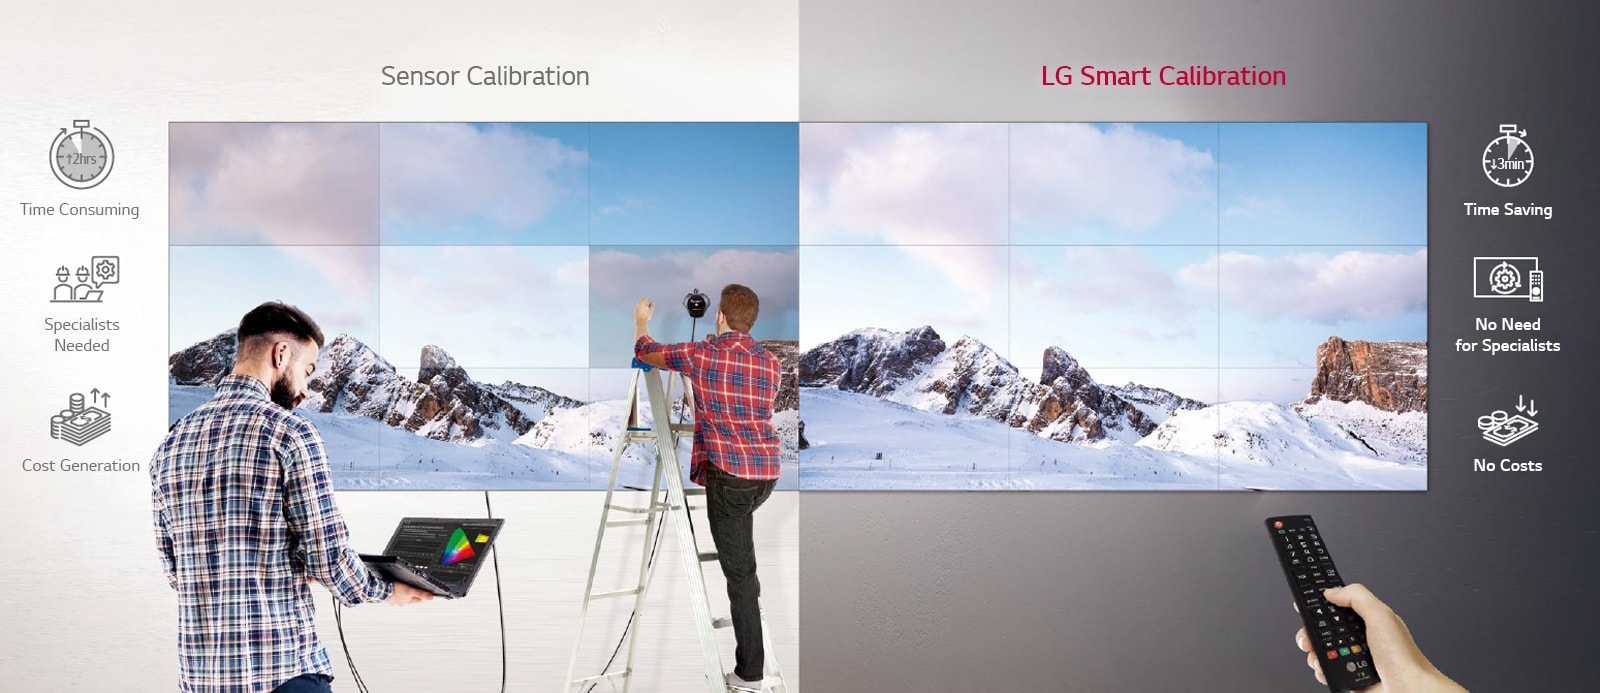 On the left, there is a person using sensor calibration to adjust the colors of the video wall through the connected laptop, and the other person on the ladder is assessing the screen error. In contrast, LG Smart Calibration user on the right is simply and conveniently adjusting on a remote controller.